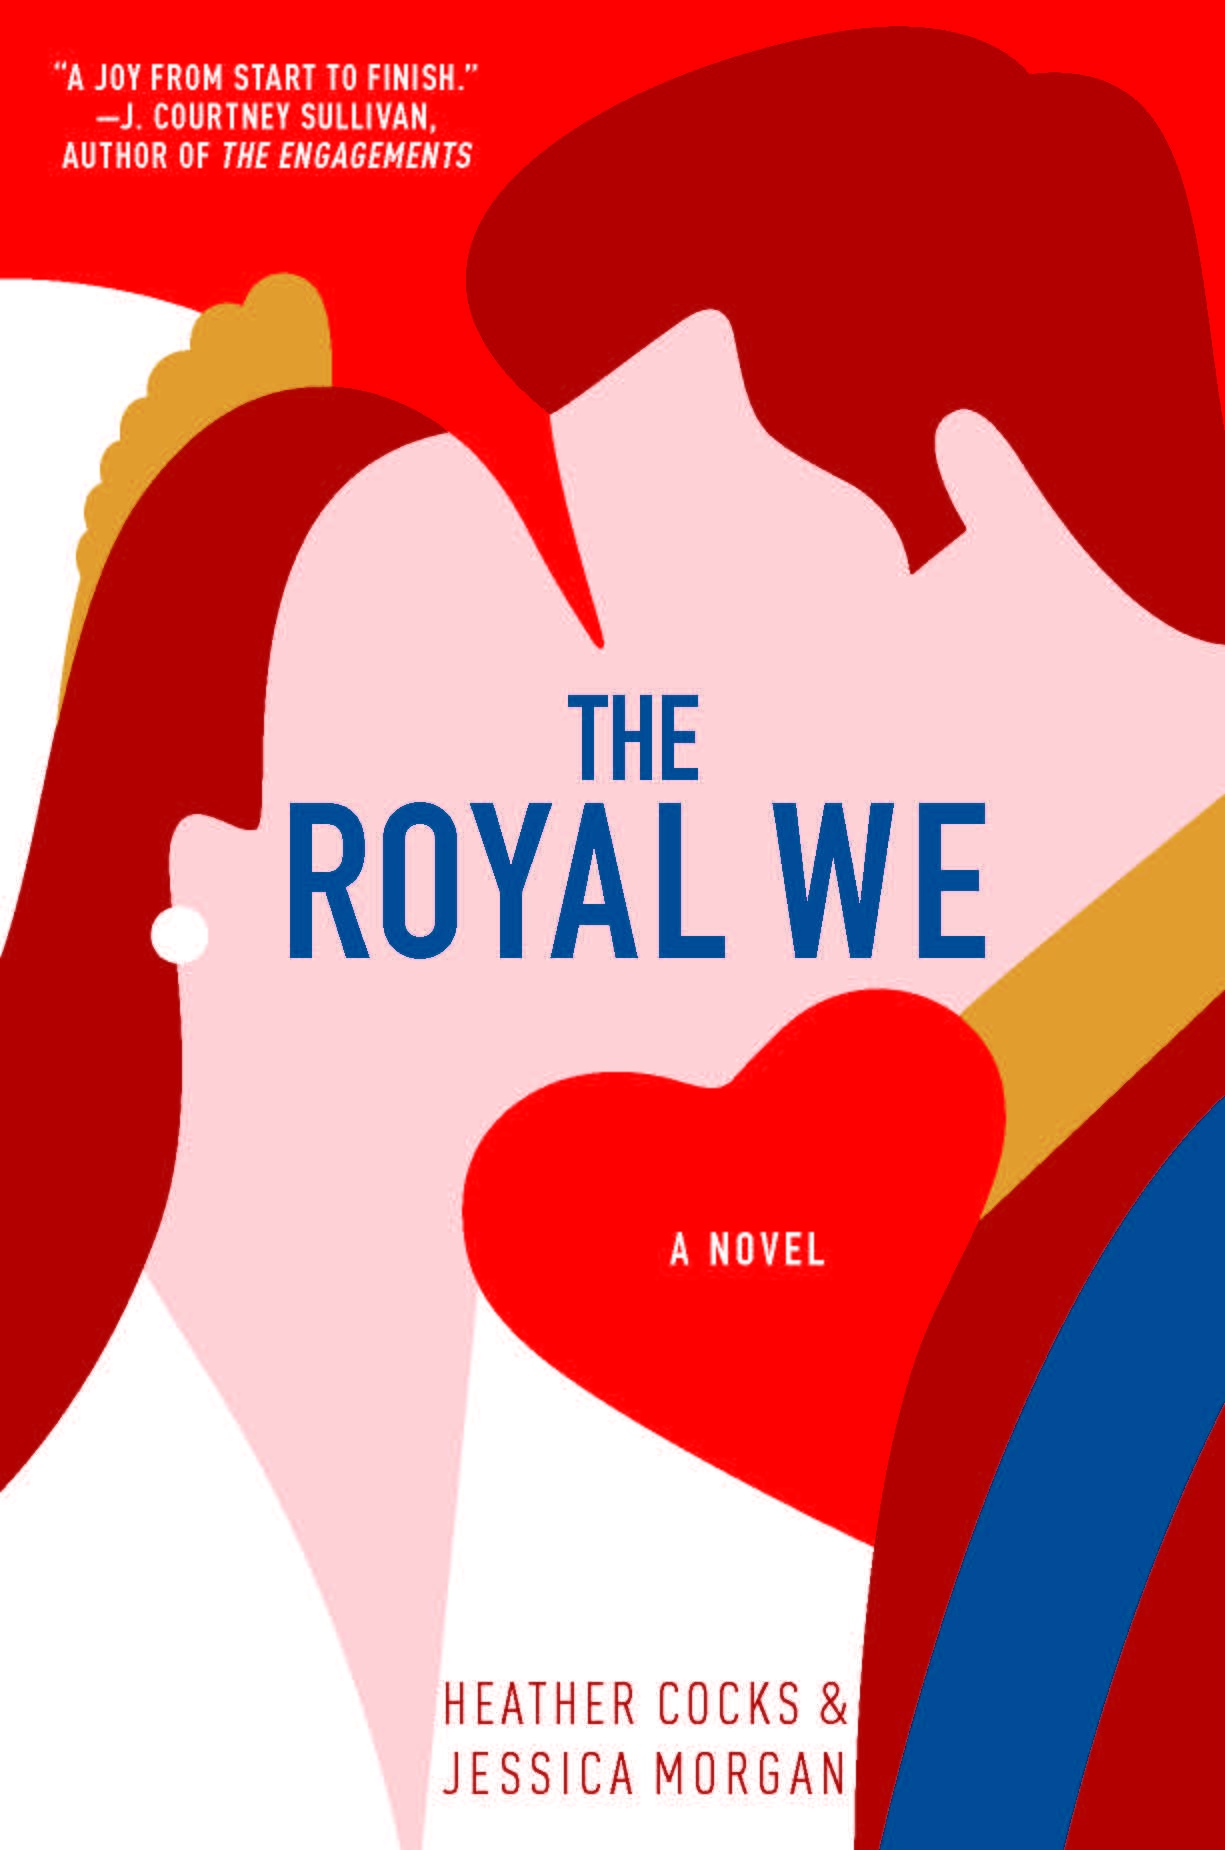 THE LIBRARY- The Royal We by Heather Cocks & Jessica Morgan aka- The Fuggirls